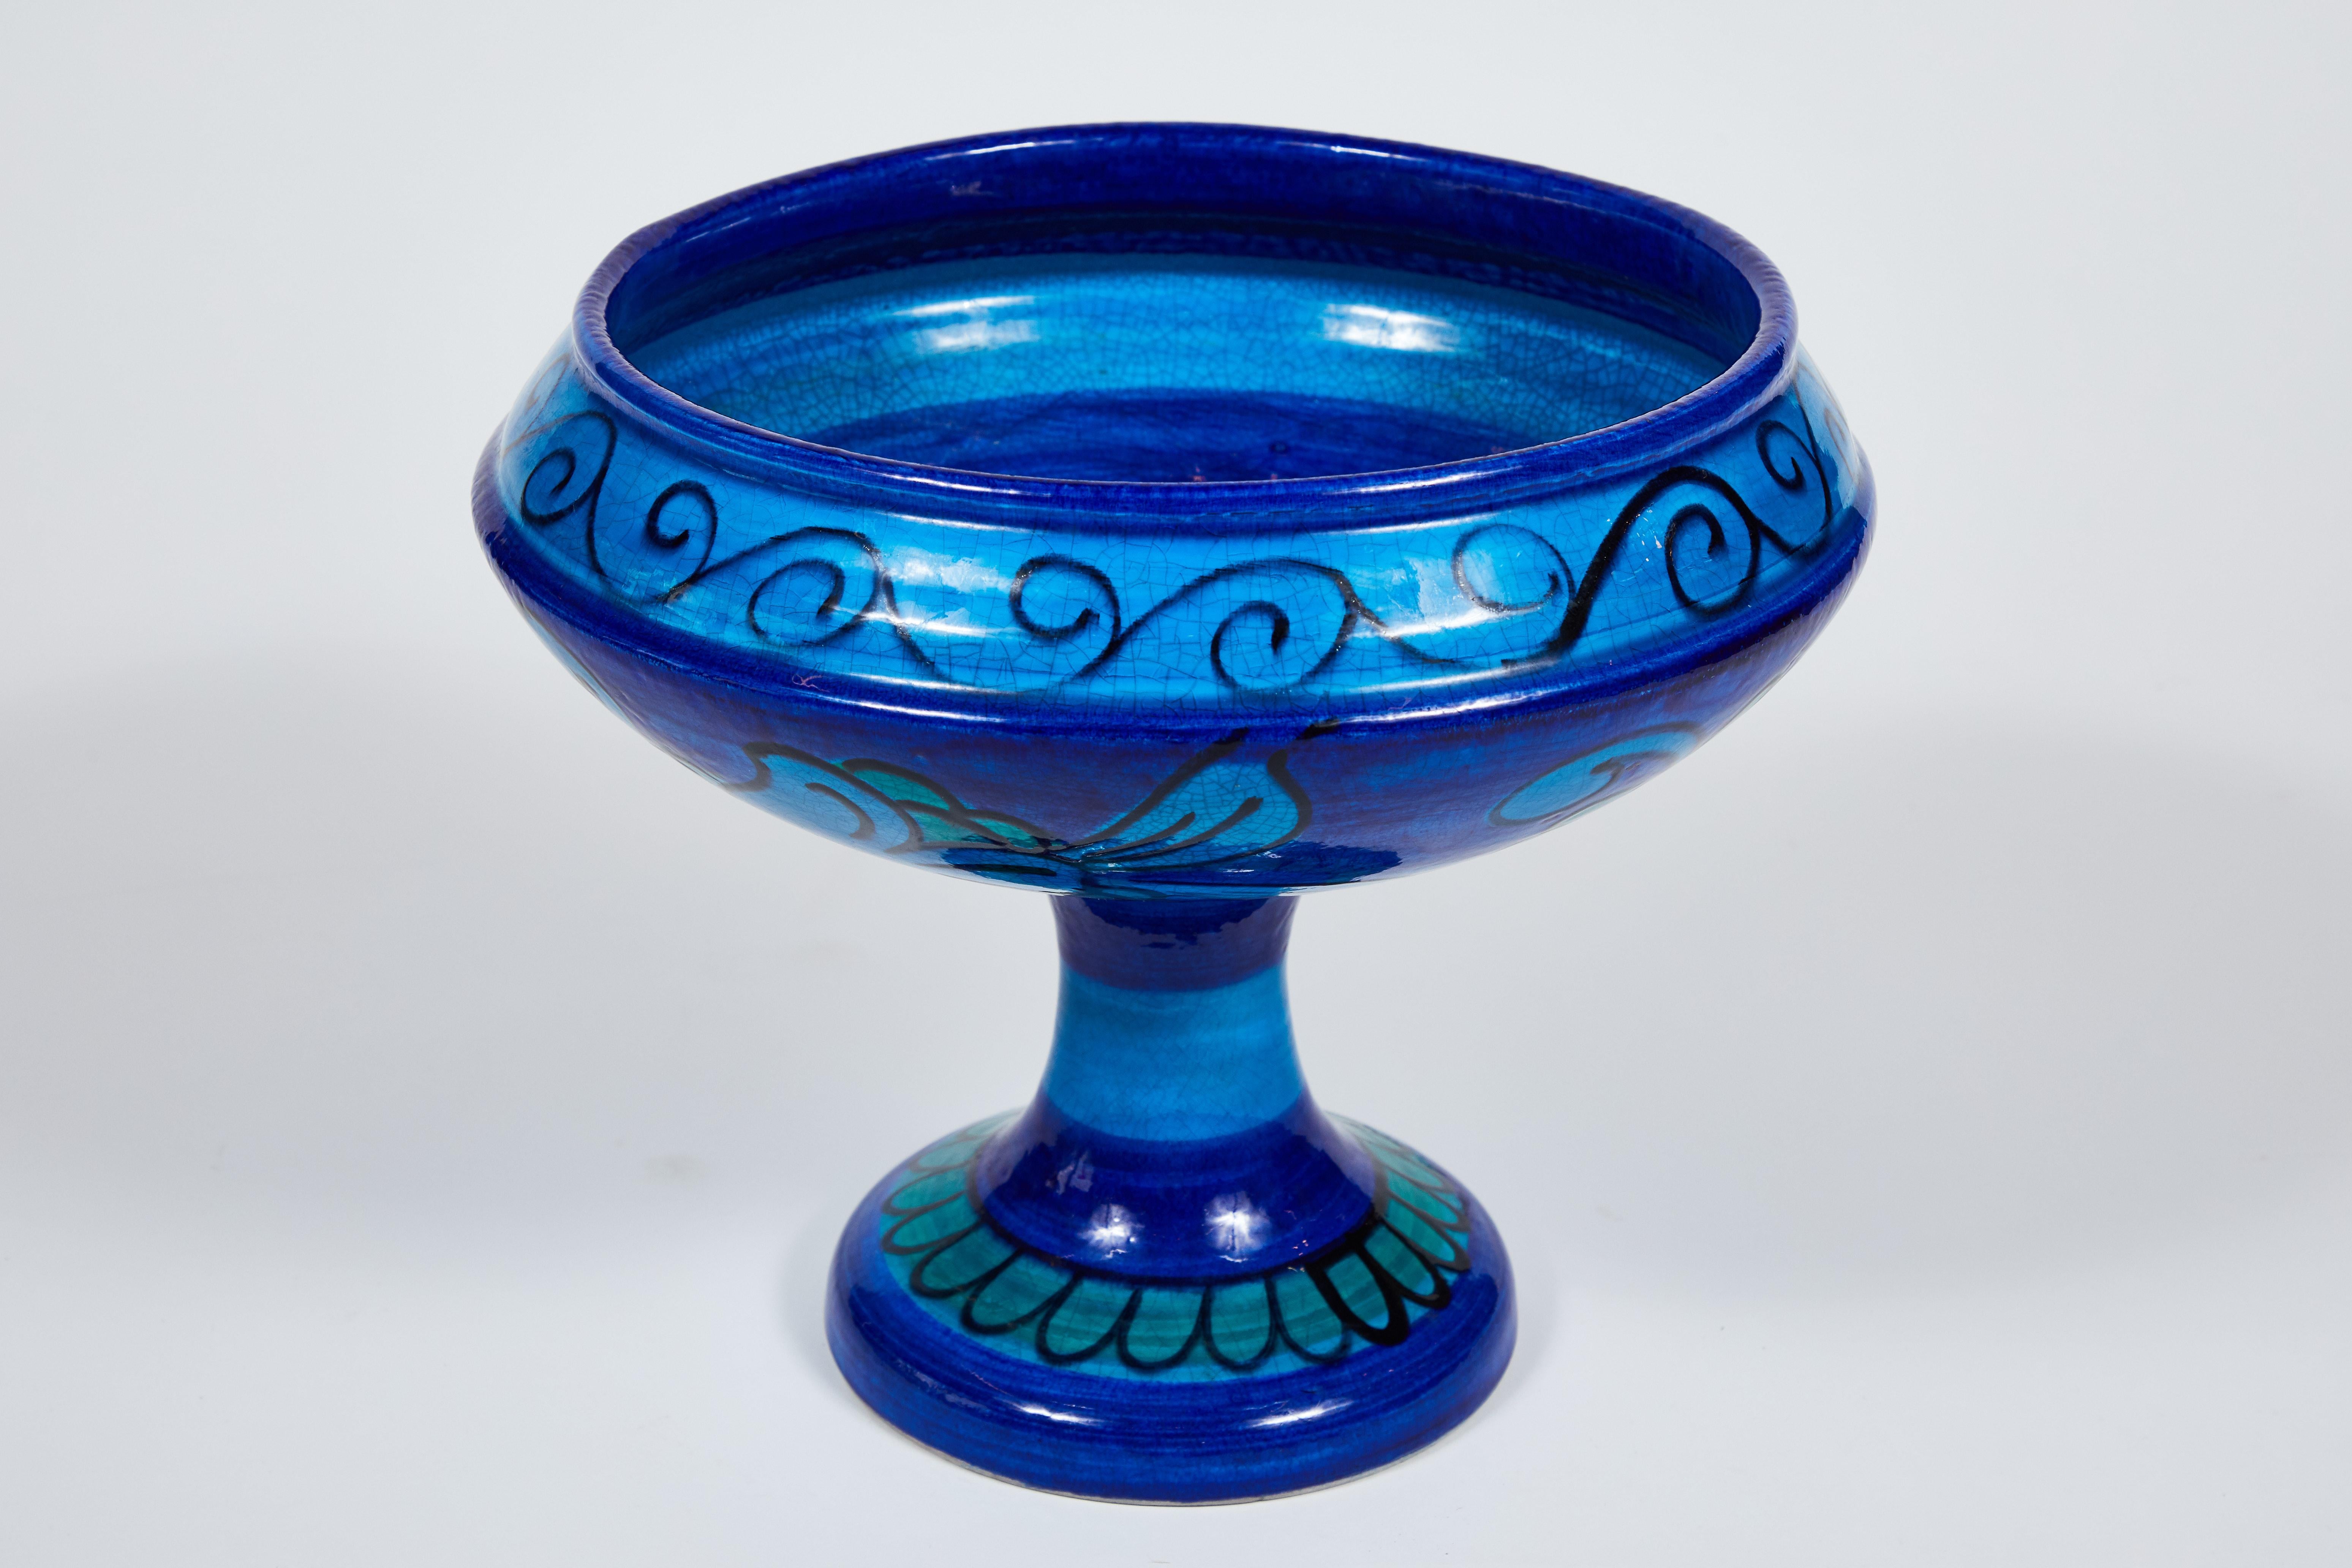 This is a tall footed bowl or presentation bowl in the famous Bitossi blue glaze. This example features a striped pedestal and hand painted floral decoration, an impressive standing vase with the Classic glaze colors of the 1960s: Green, turquoise,